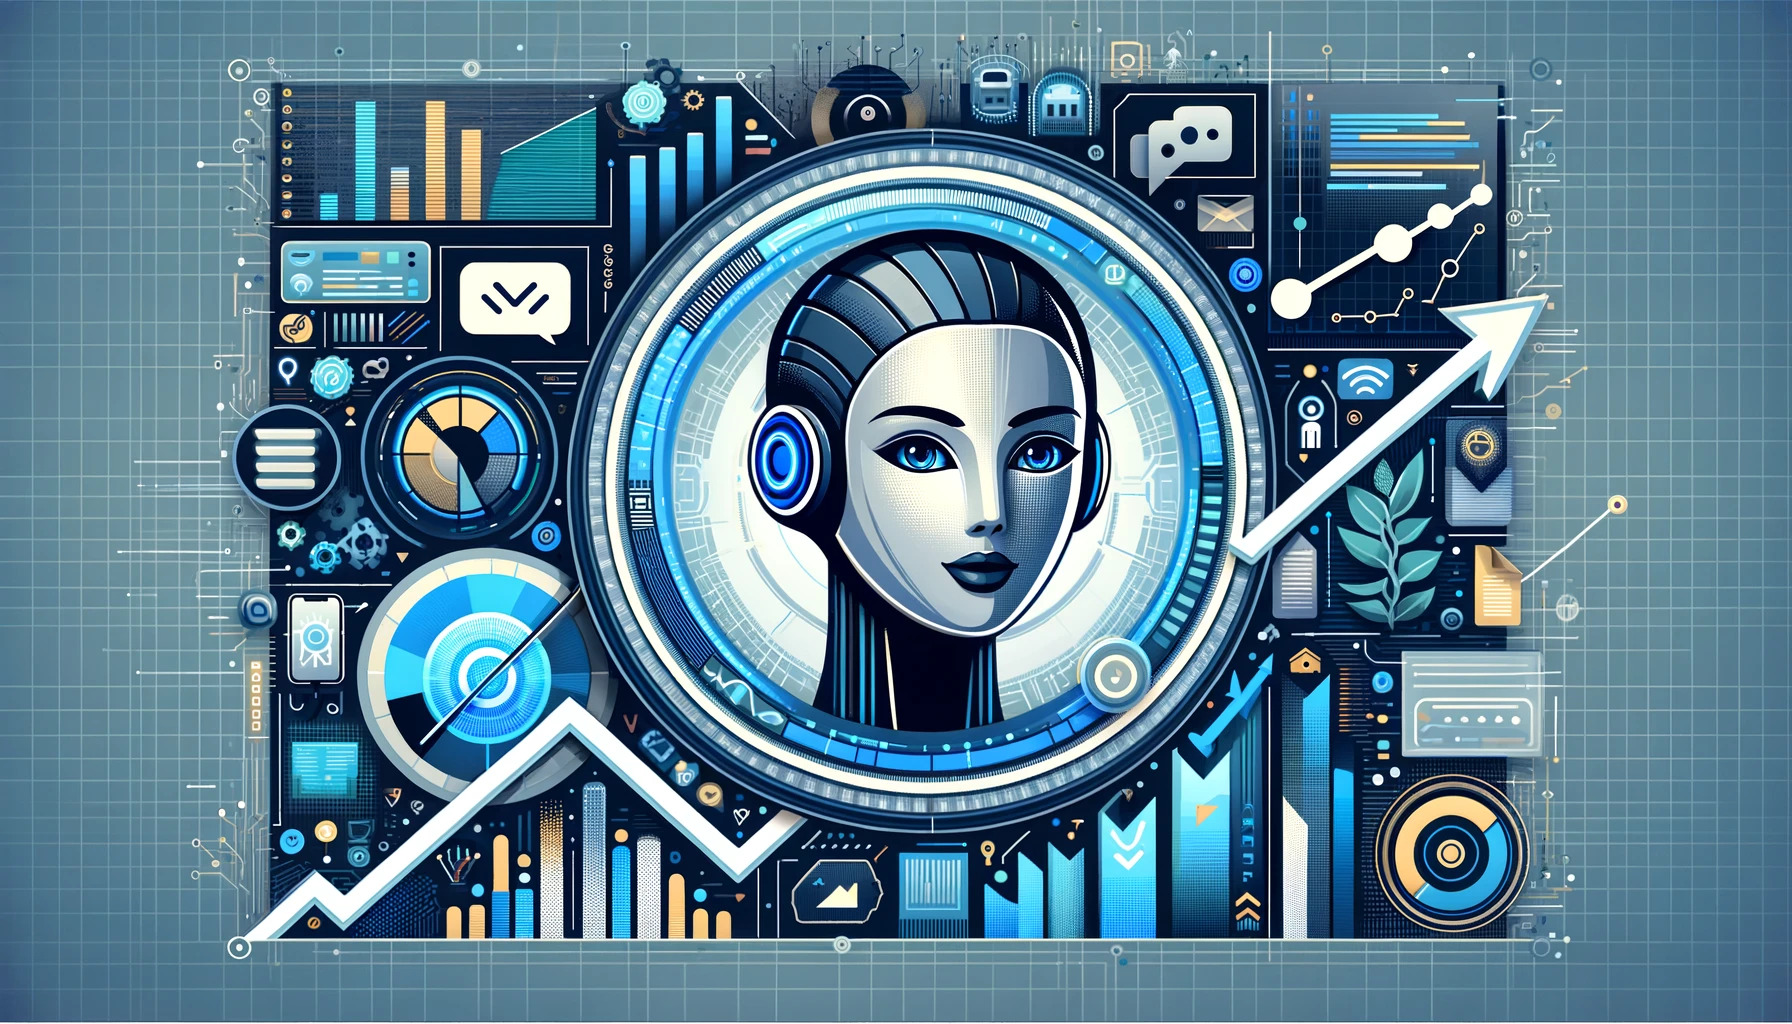 Digital illustration showing the integration of virtual assistants in marketing technology to boost business growth. Features include digital networks, a virtual assistant avatar, and symbols of growth like graphs.